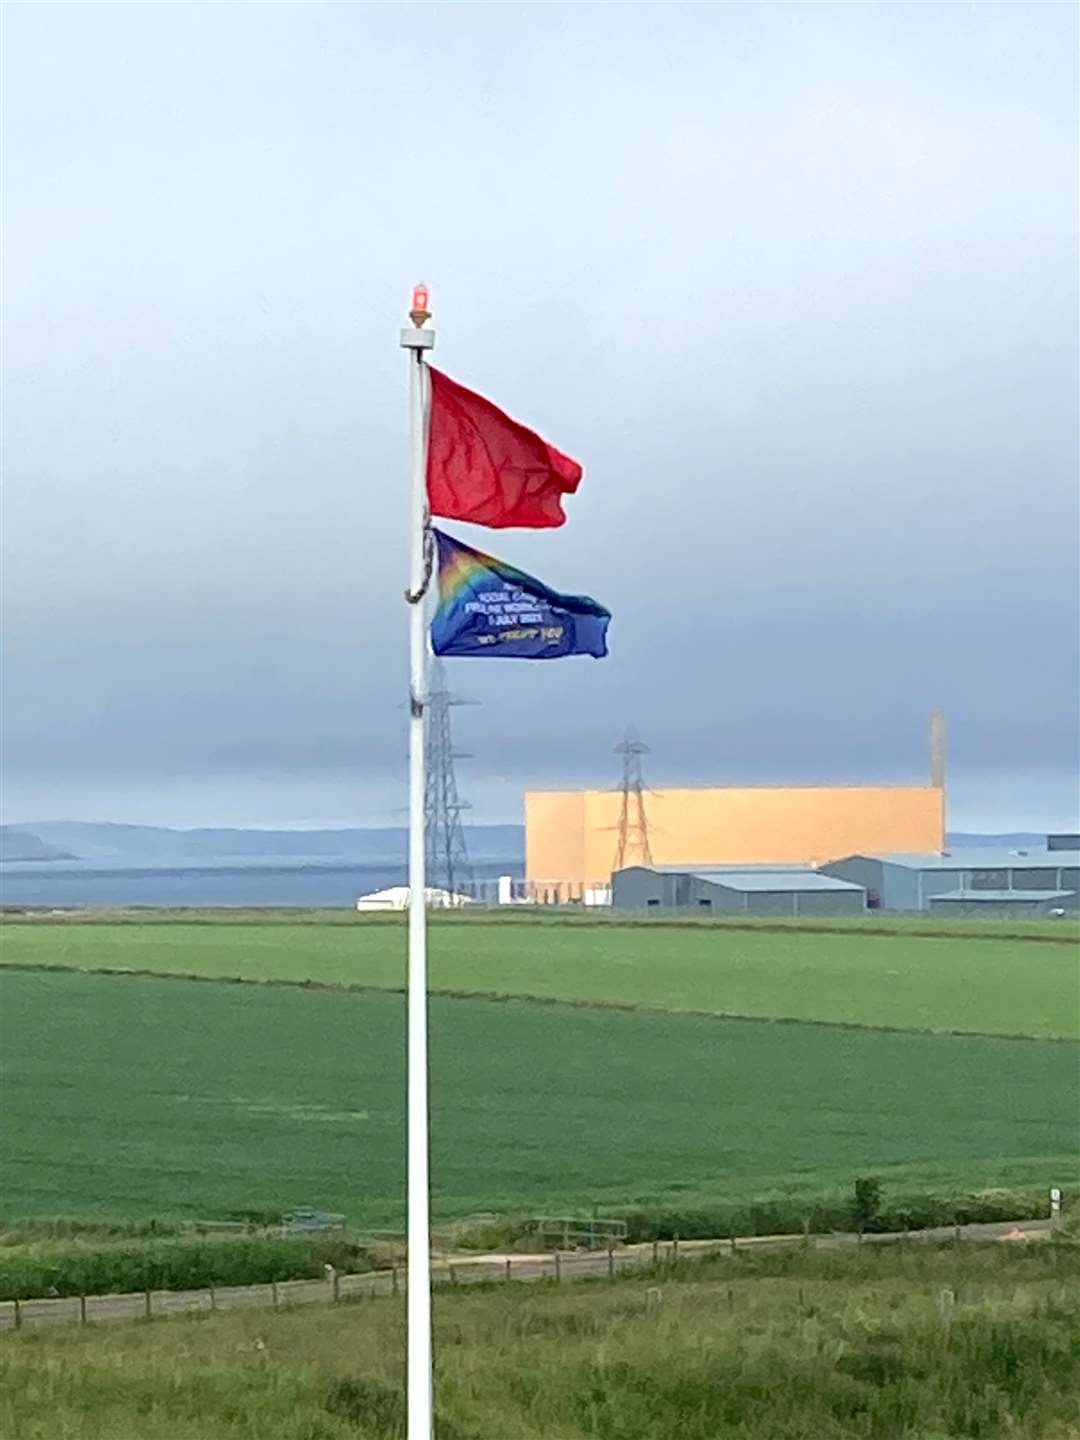 The flag celebrating the NHS, Social Care and Frontline Workers’ Day will remain up for one week at Dounreay.